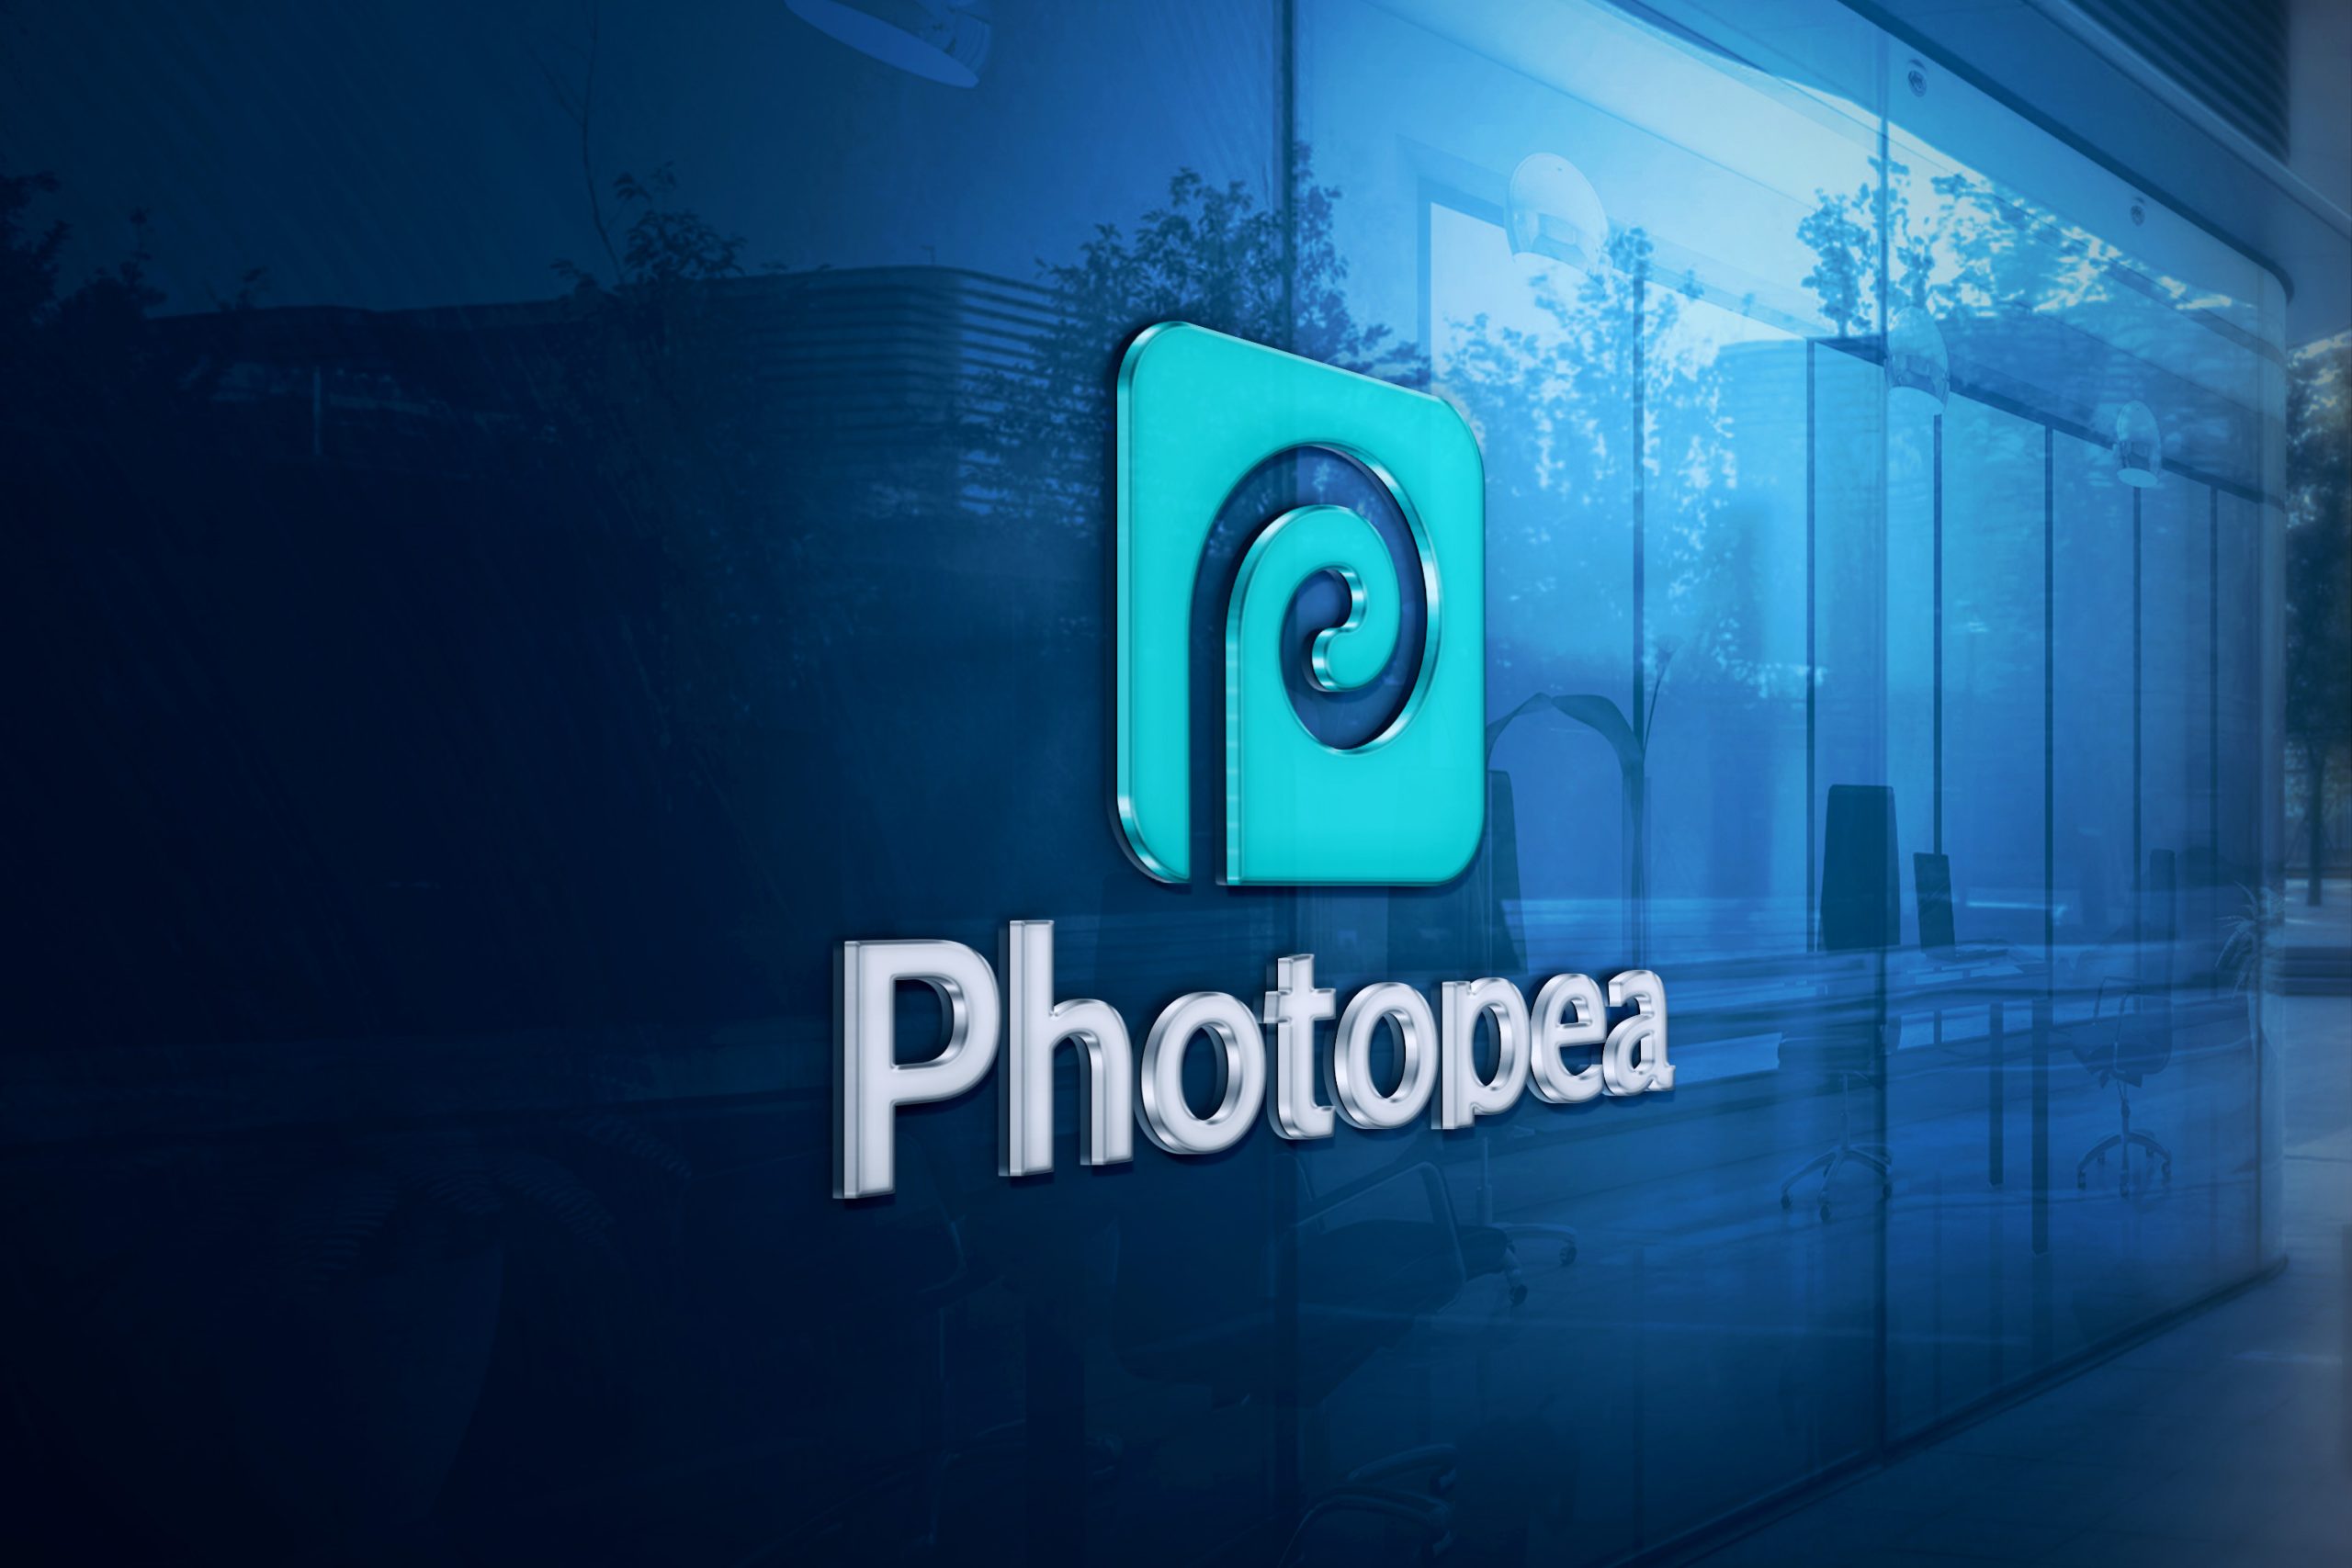 3D Glass Logo Mockup on Blue Office Wall by GraphicsFamily